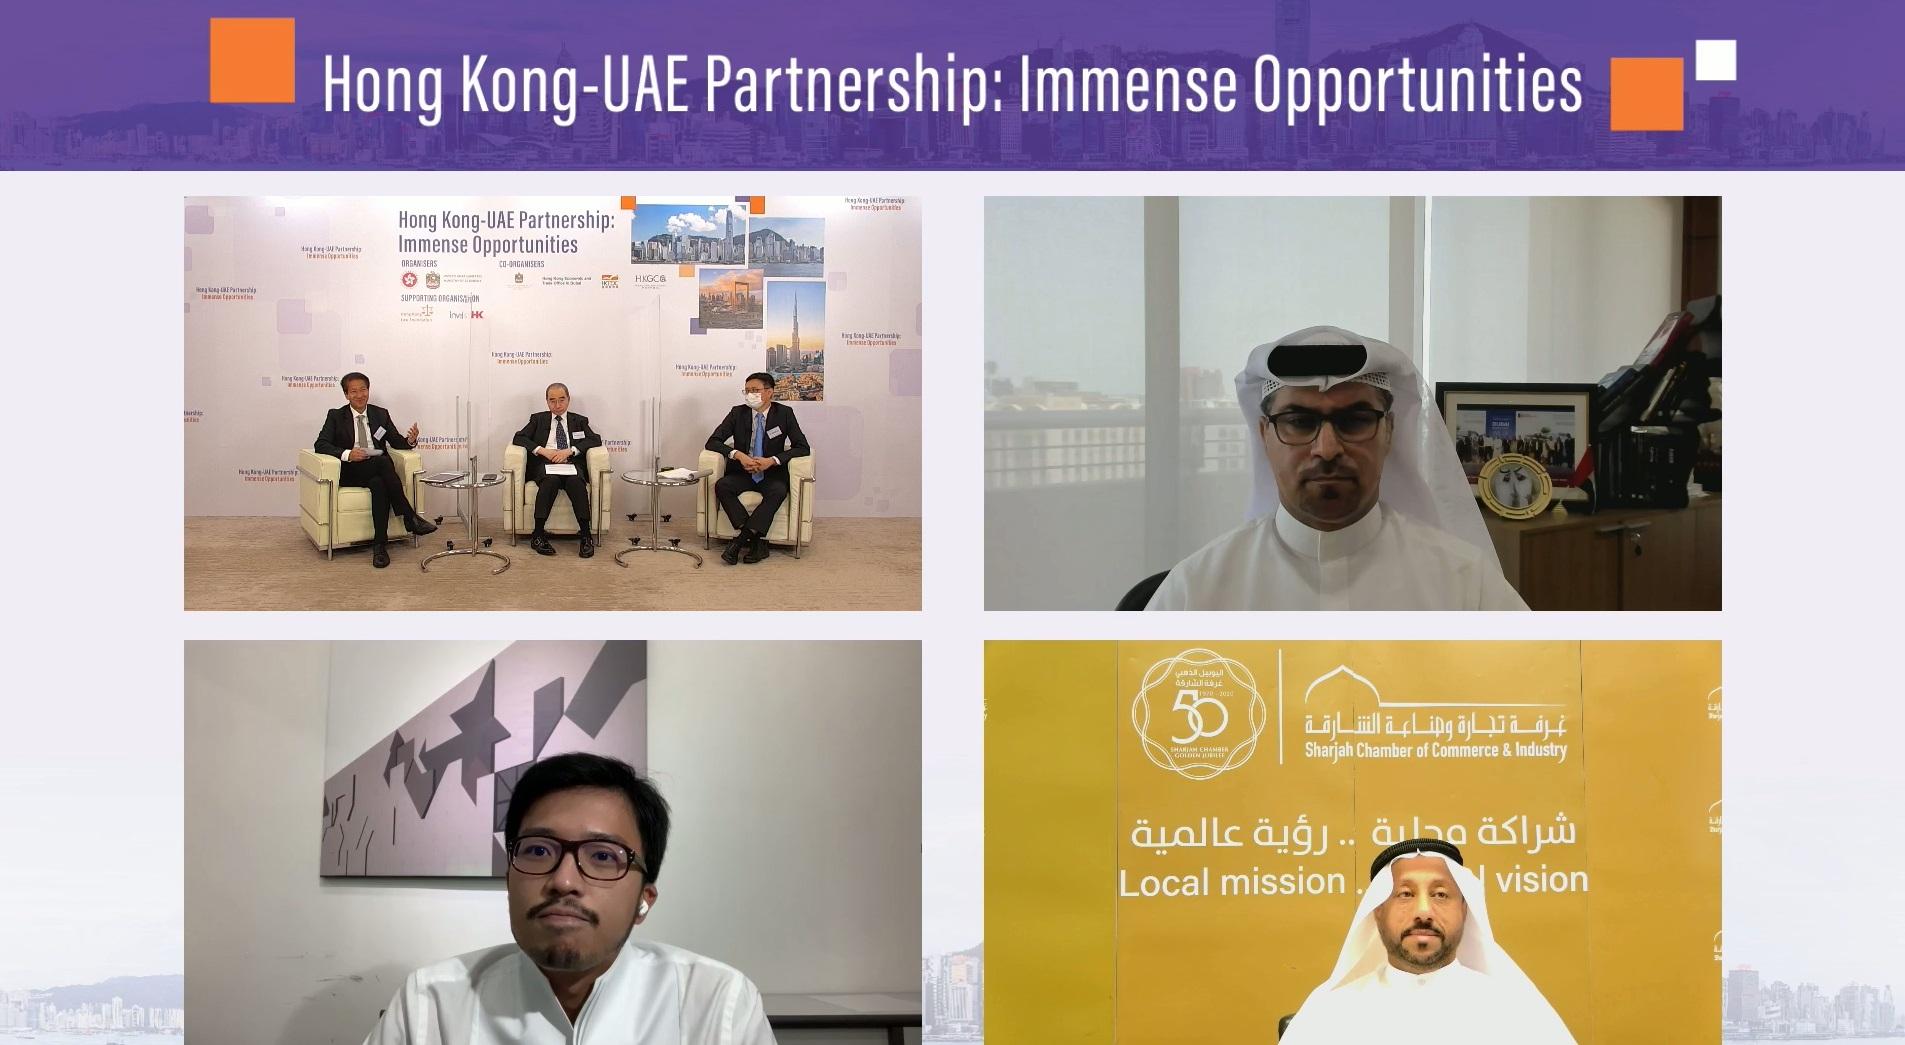 The Commerce and Economic Development Bureau and the Ministry of Economy of the United Arab Emirates (UAE) jointly organised a webinar titled "Hong Kong-UAE Partnership: Immense Opportunities" today (May 24) to explore collaboration opportunities in such fields as trade, investment and professional services. Photo shows panelists sharing their insights at the webinar's panel discussion.